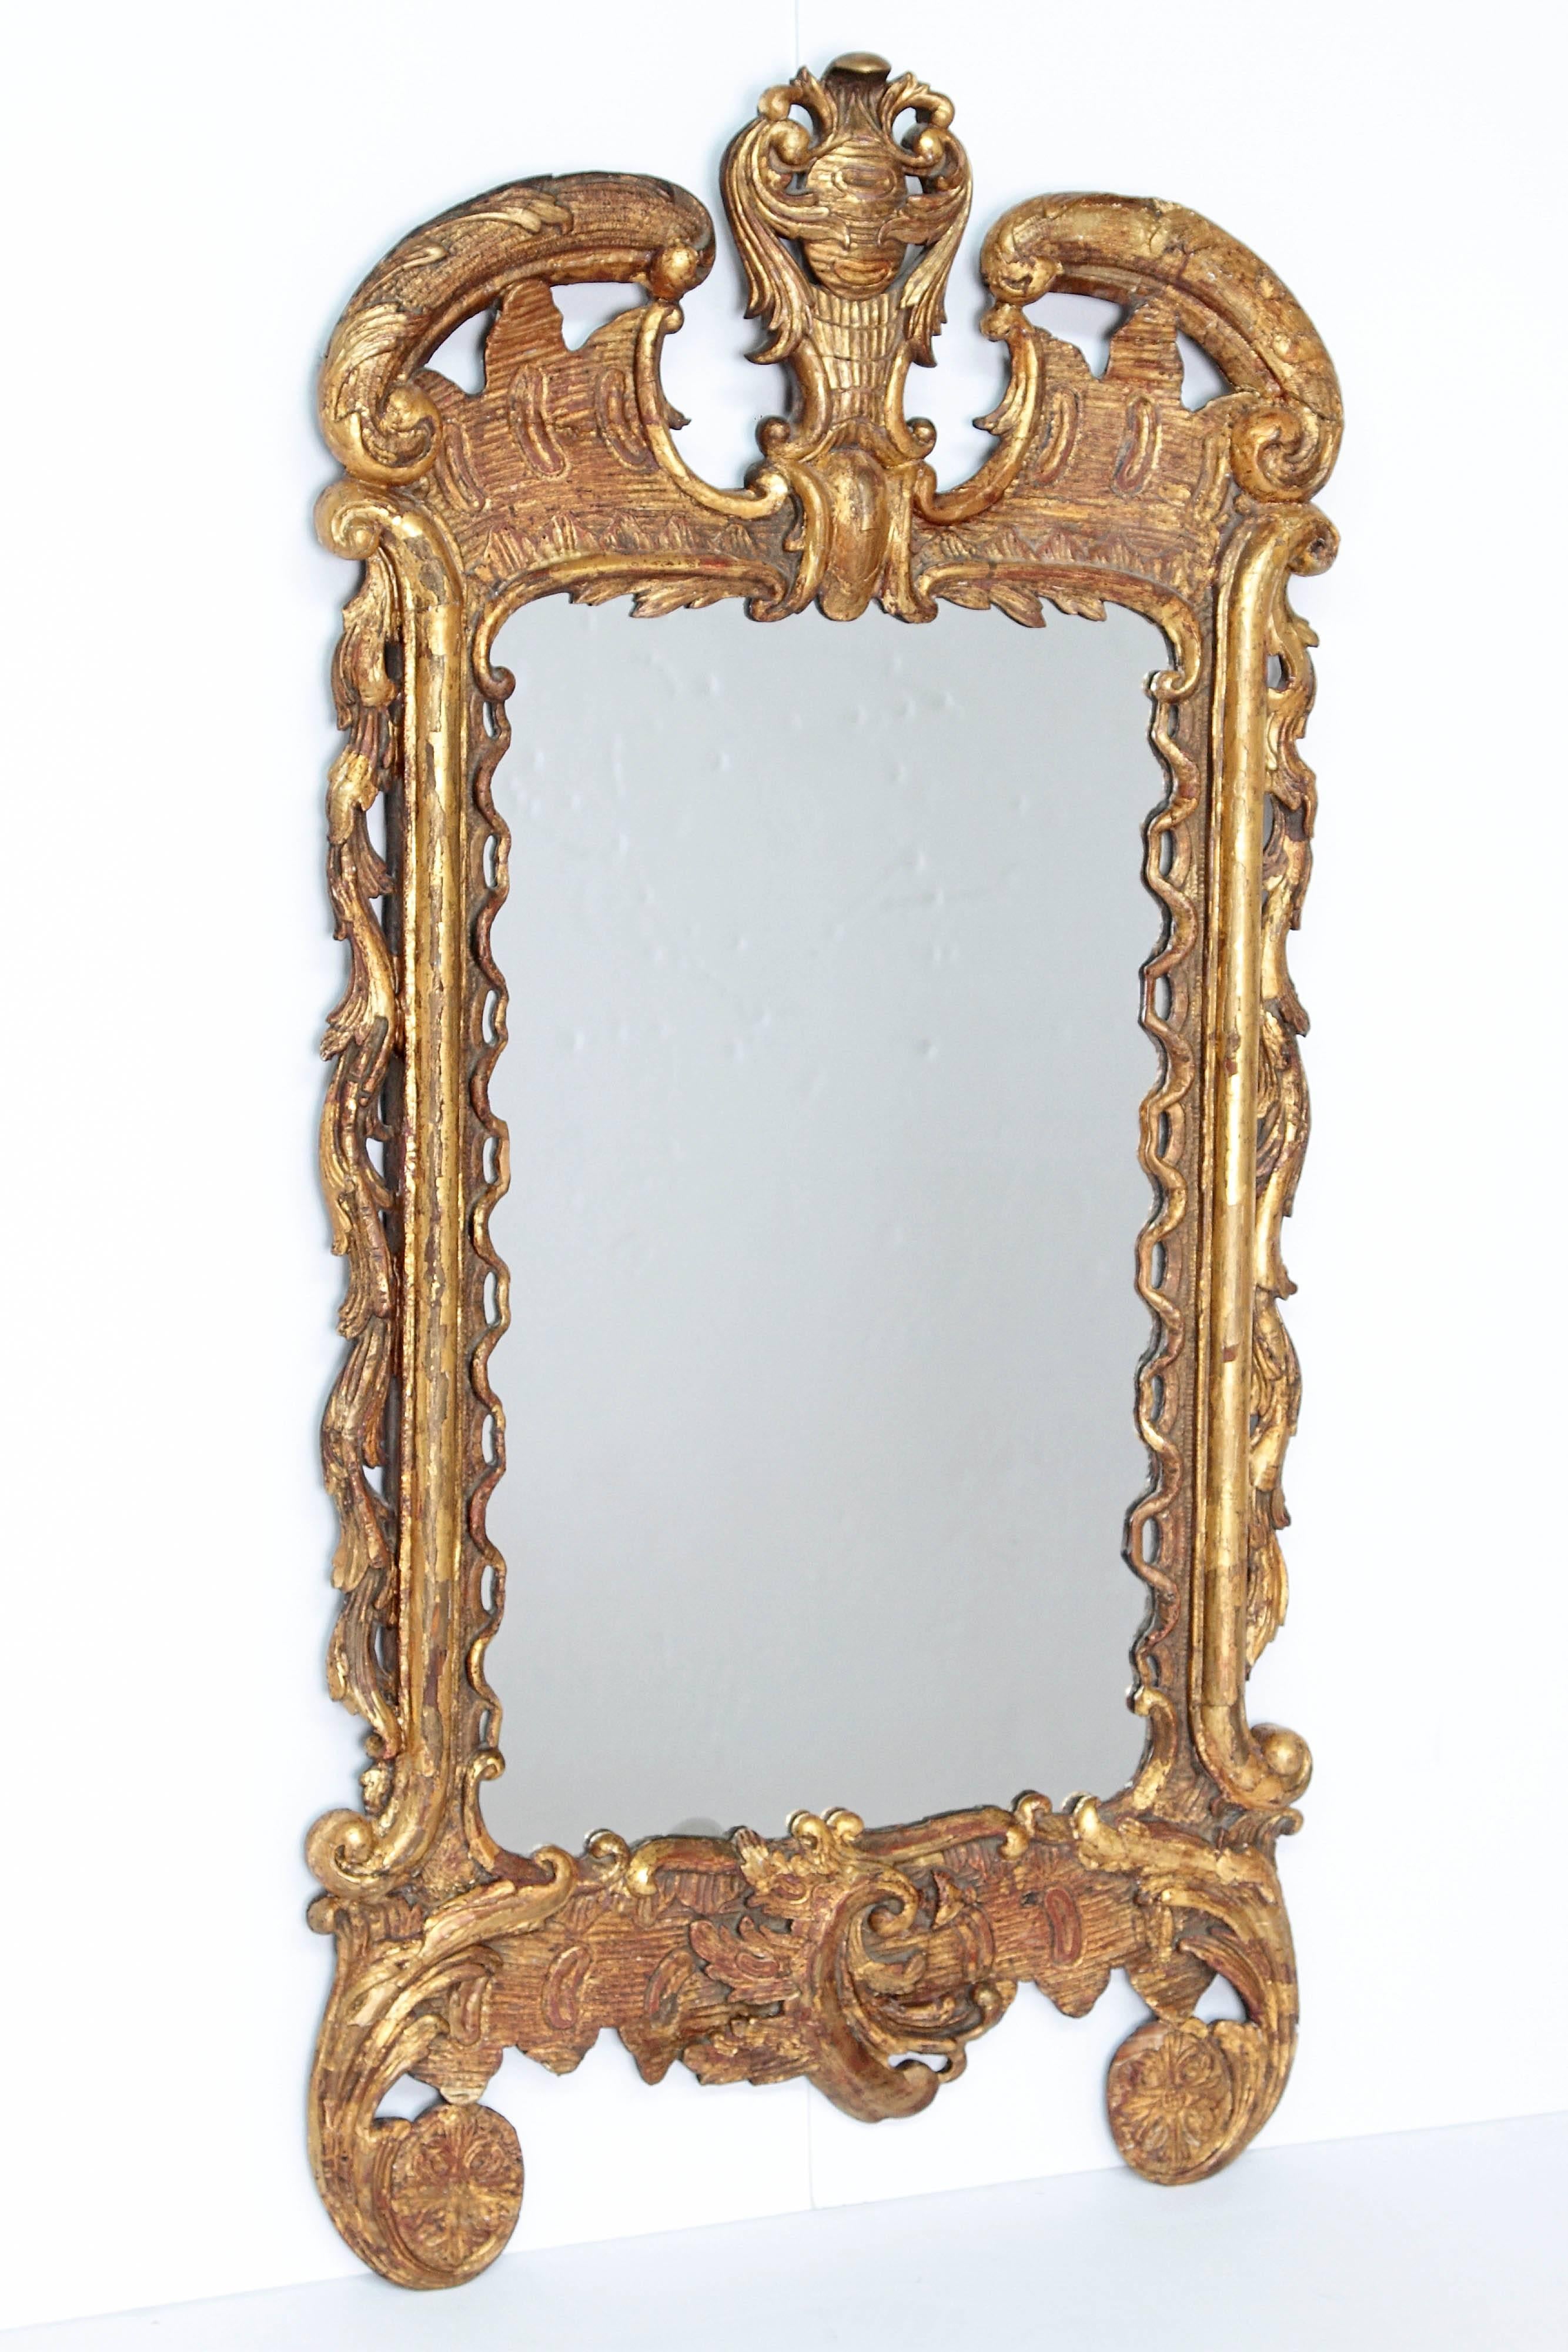 Late 18th-early 19th century George III period giltwood hand-carved pier glass / mirror, high-shouldered curved broken pediment and foliate carved center crest, open fluted wave style curving down interior side of mirror, and acanthus leaf carvings